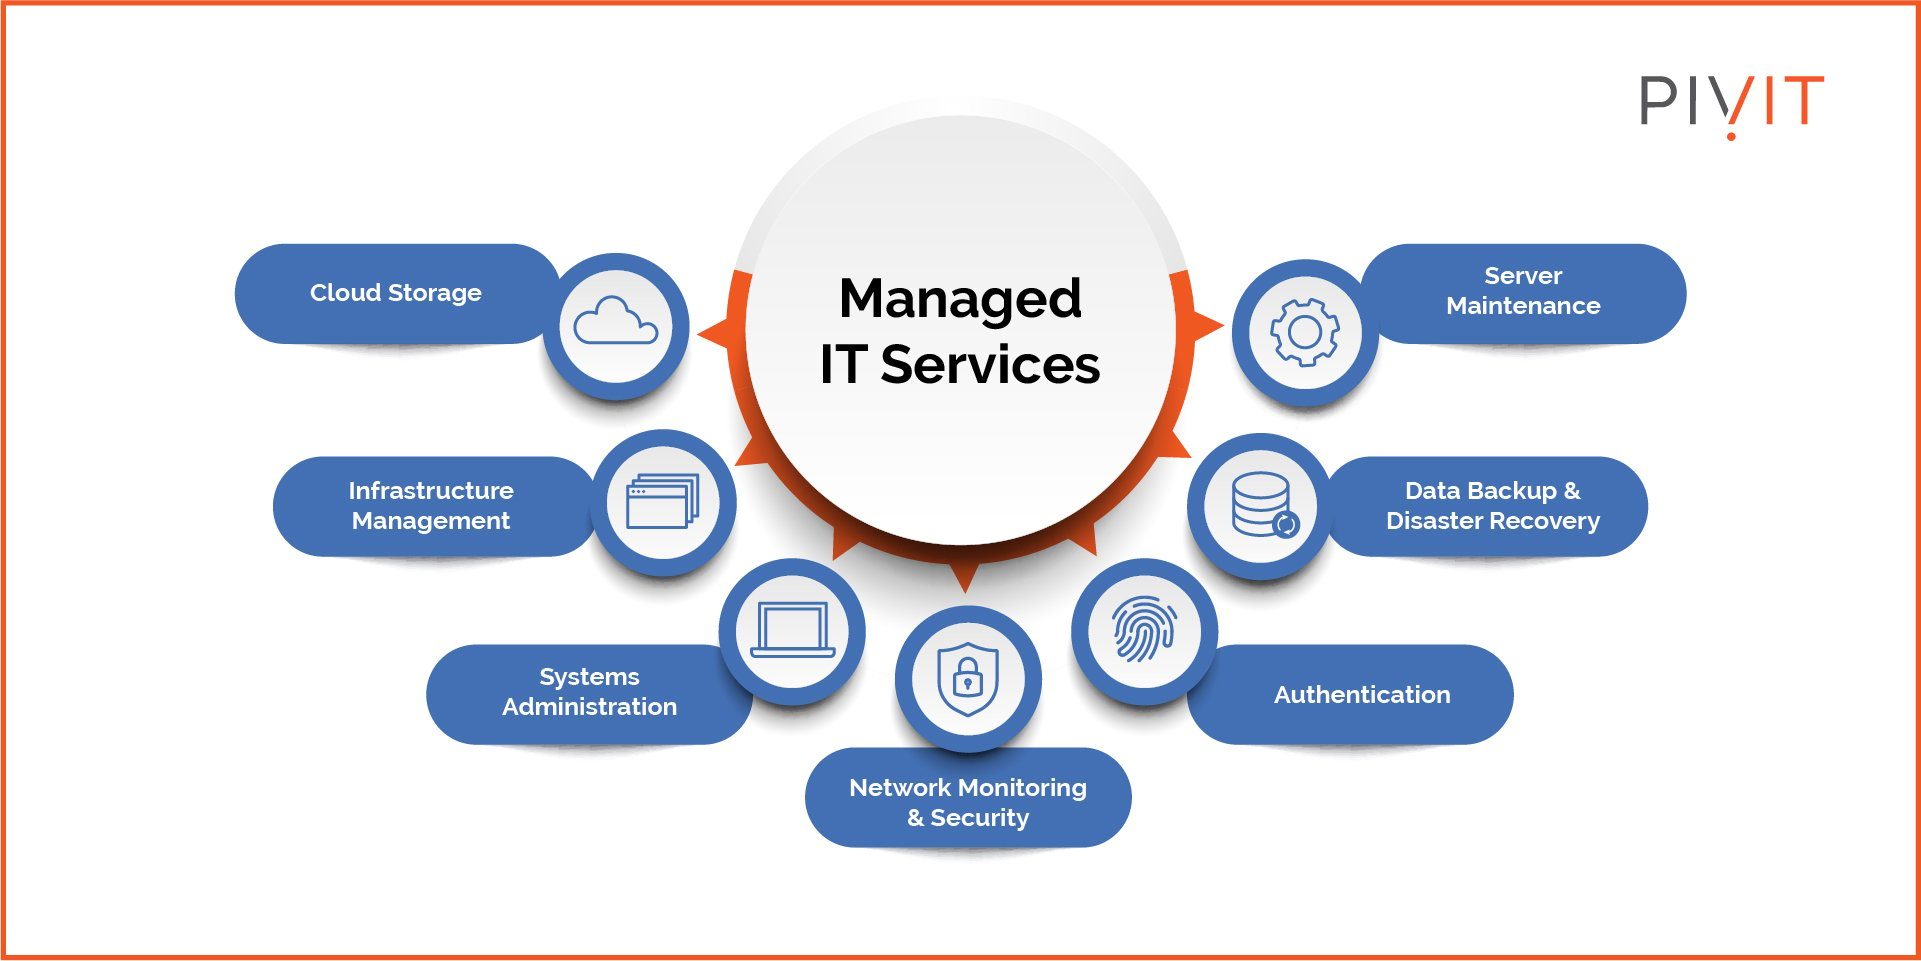 Managed IT services, including cloud storage, infrastructure maangement, systems admin, authentication, server maintenance, data backup, data recovery, and security